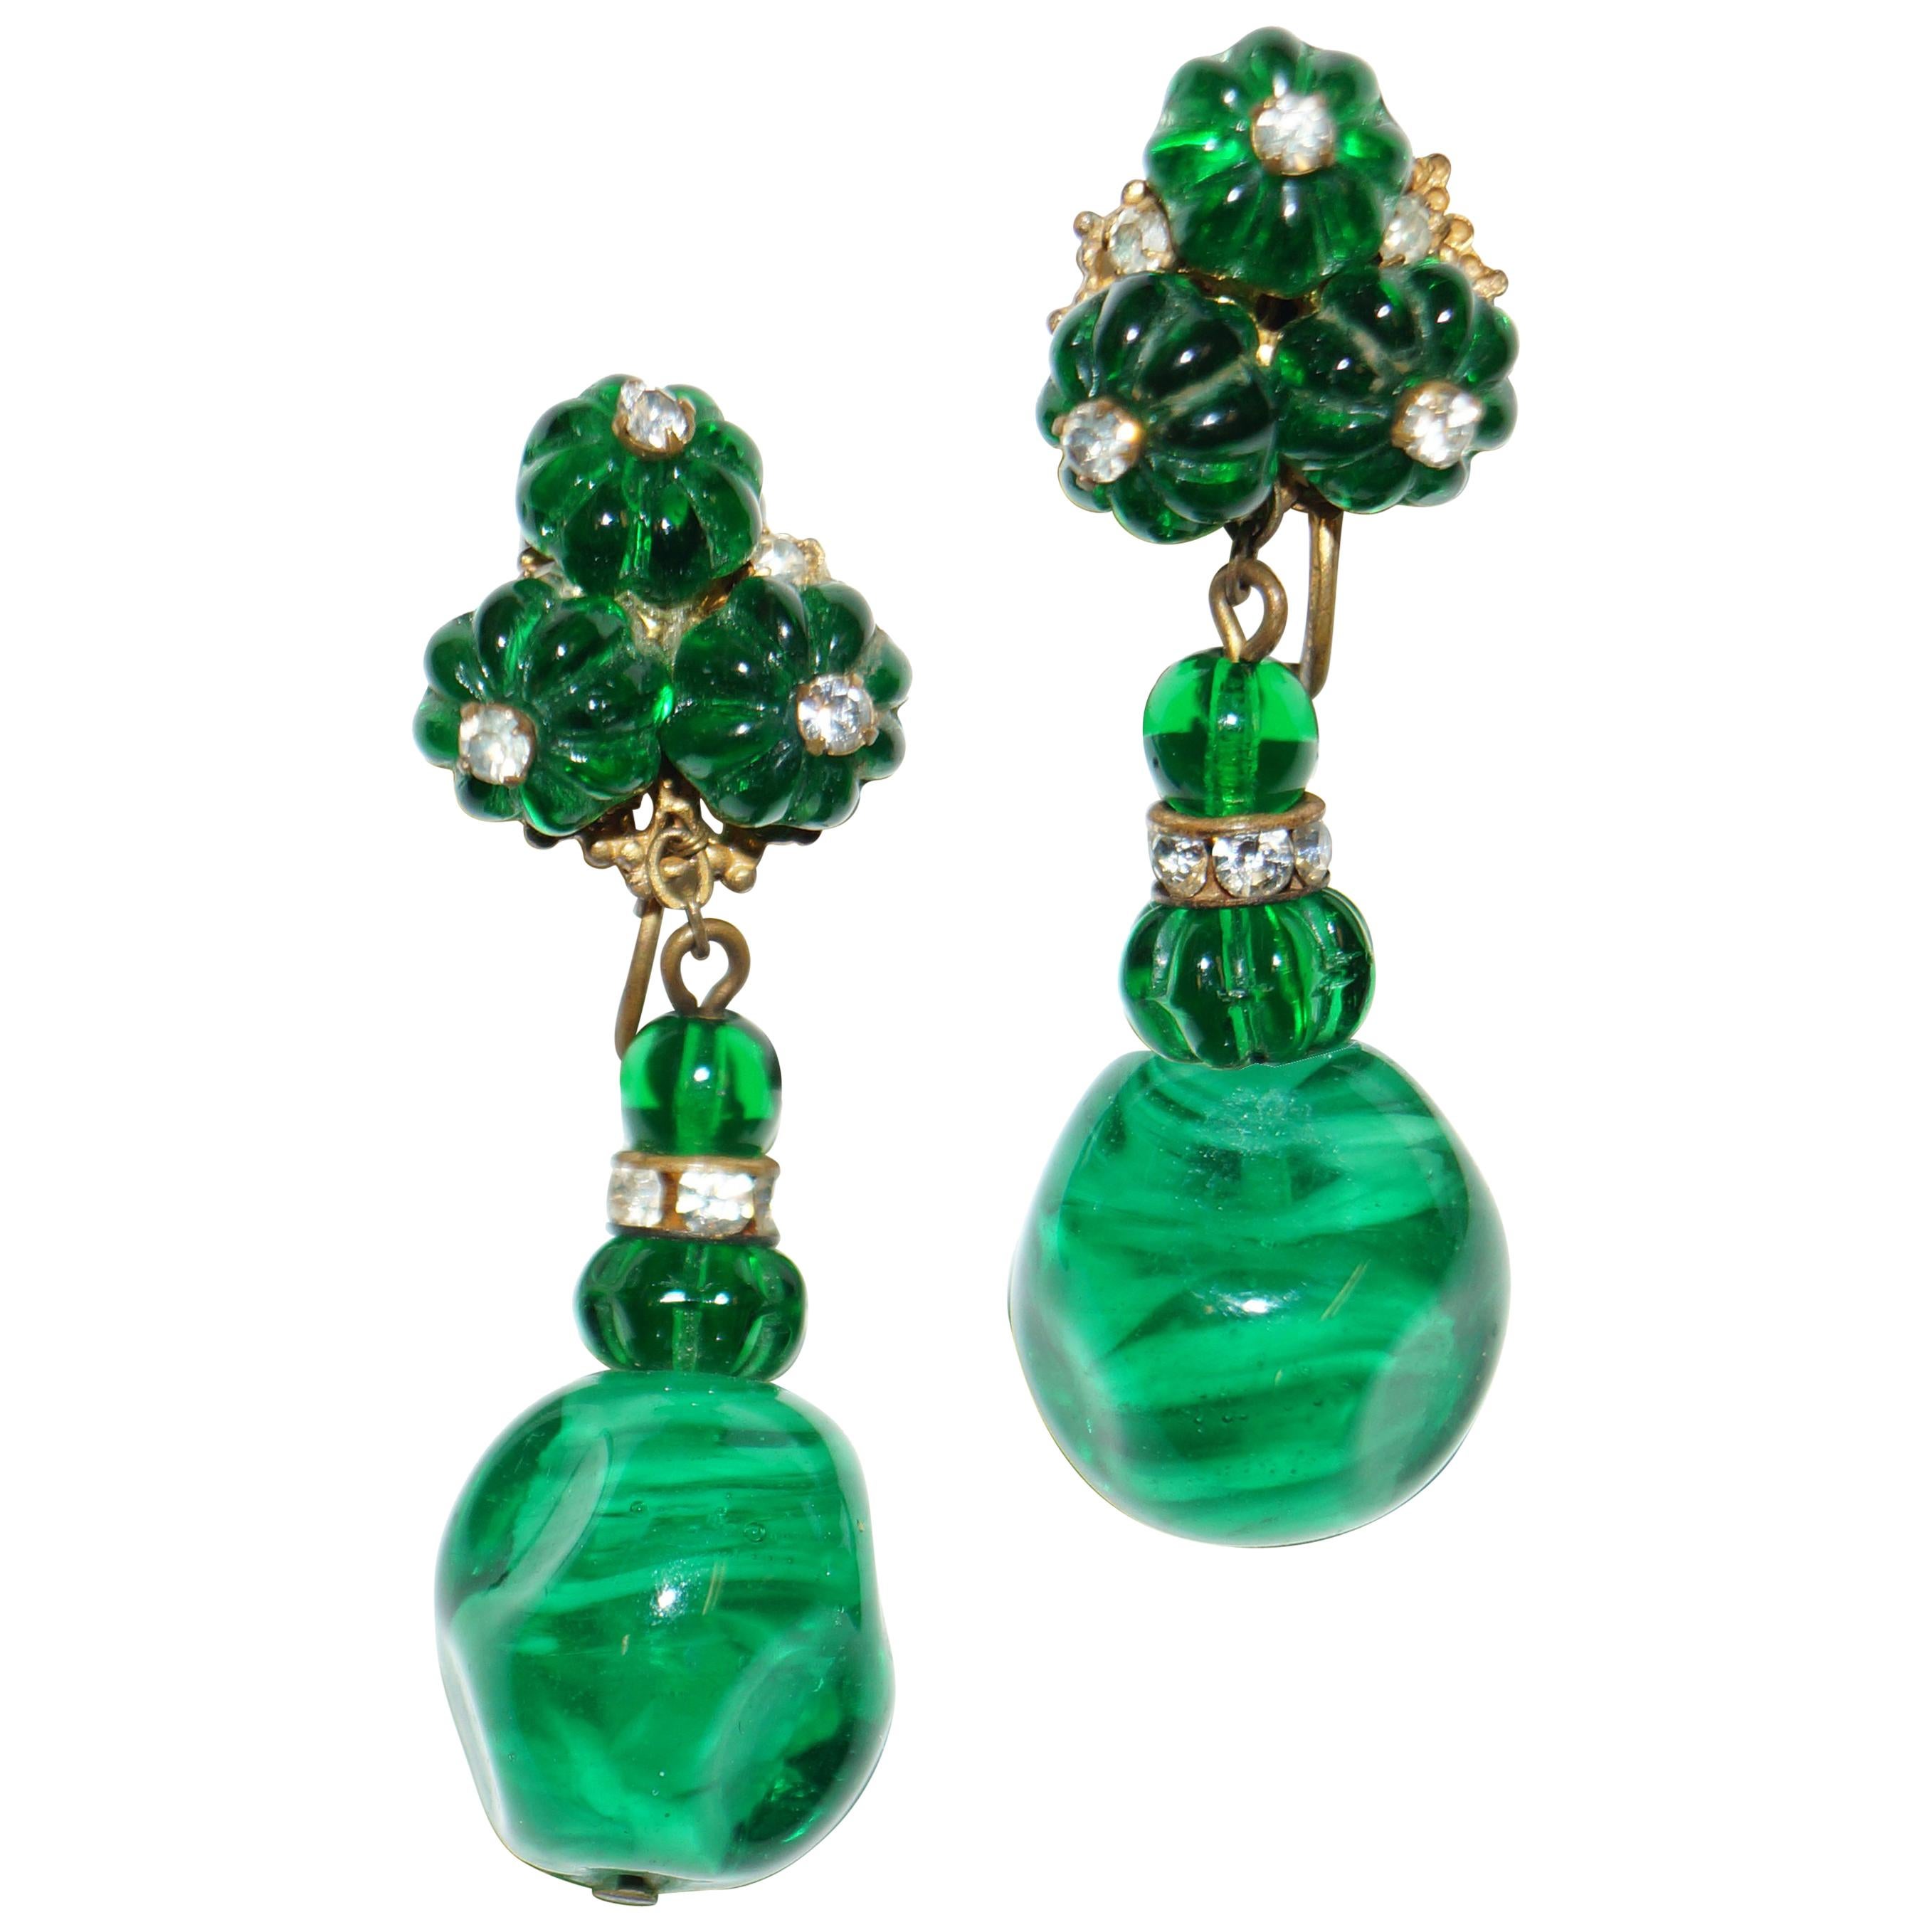 1950s Miriam Haskell Emerald Green Poured Glass and Rhinestone  Drop Earrings